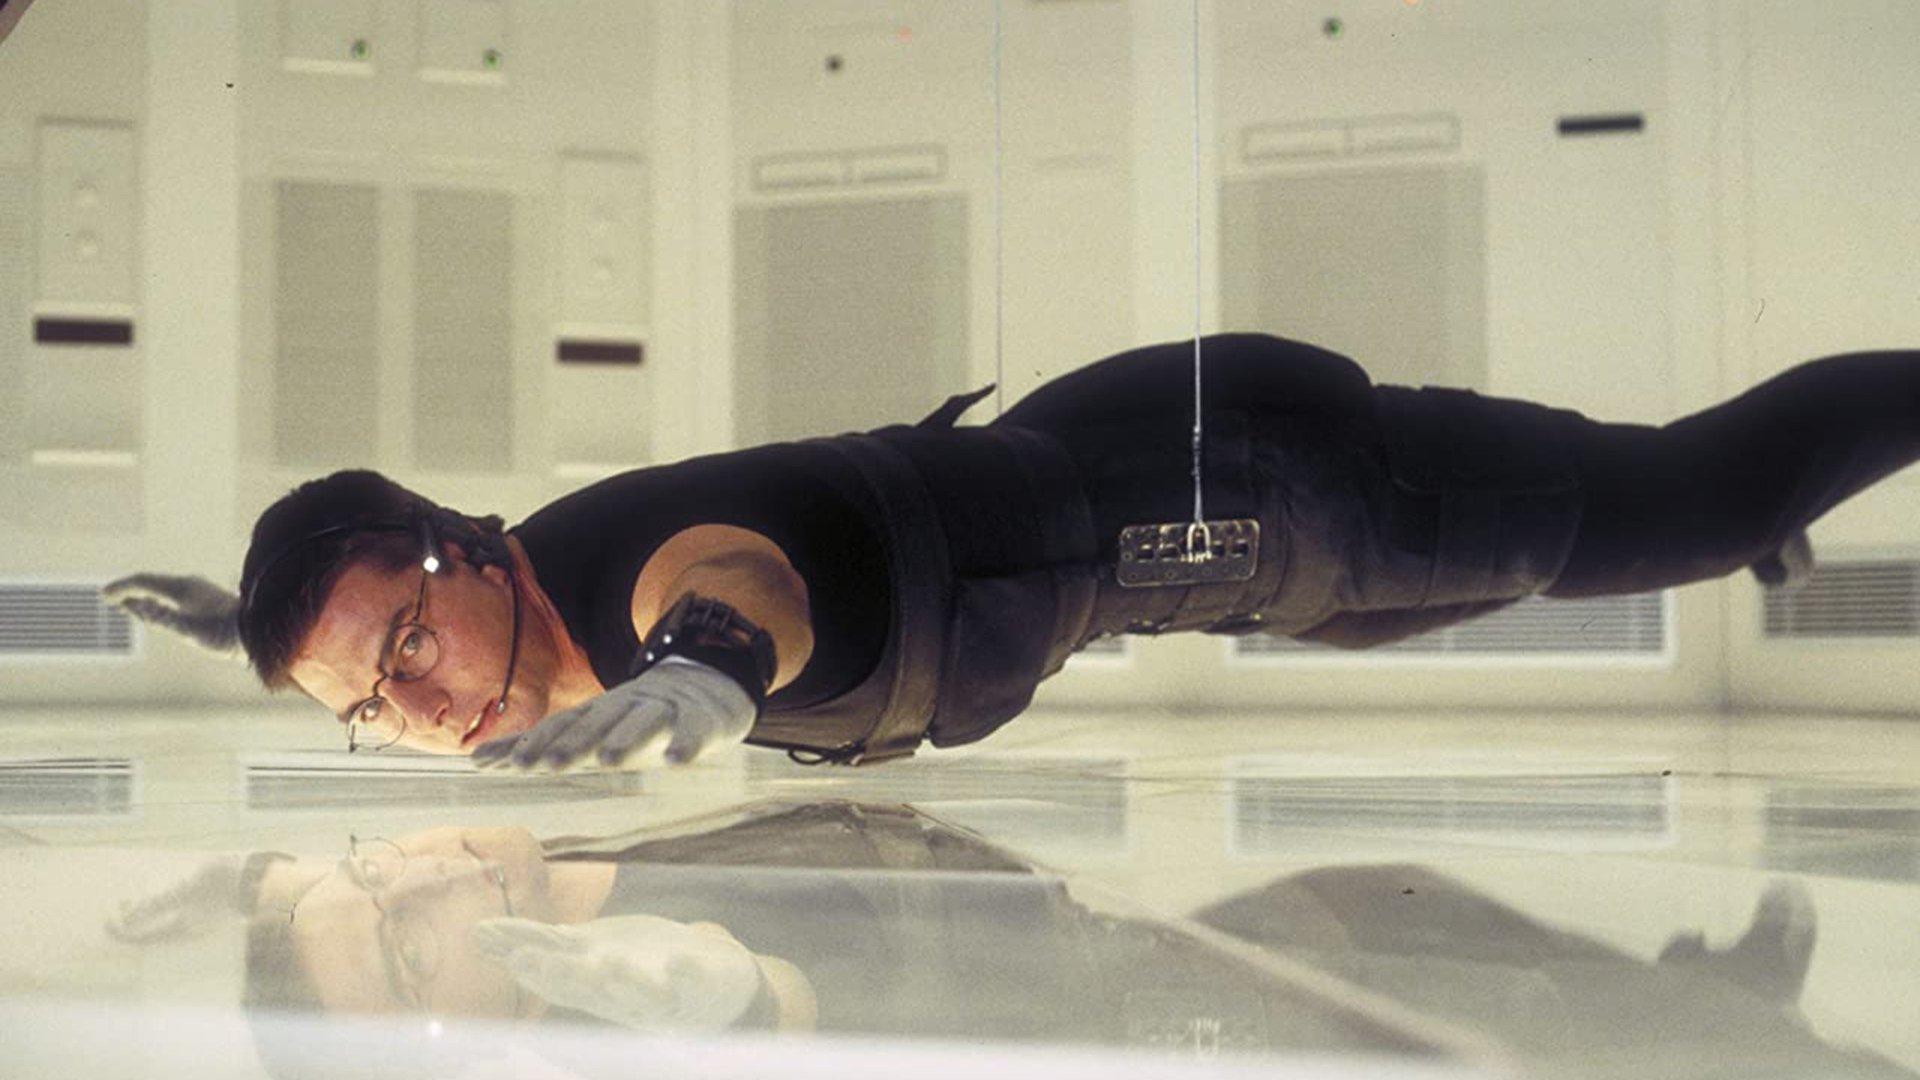 25 years ago, Mission Impossible saw the dawn of virtual sets